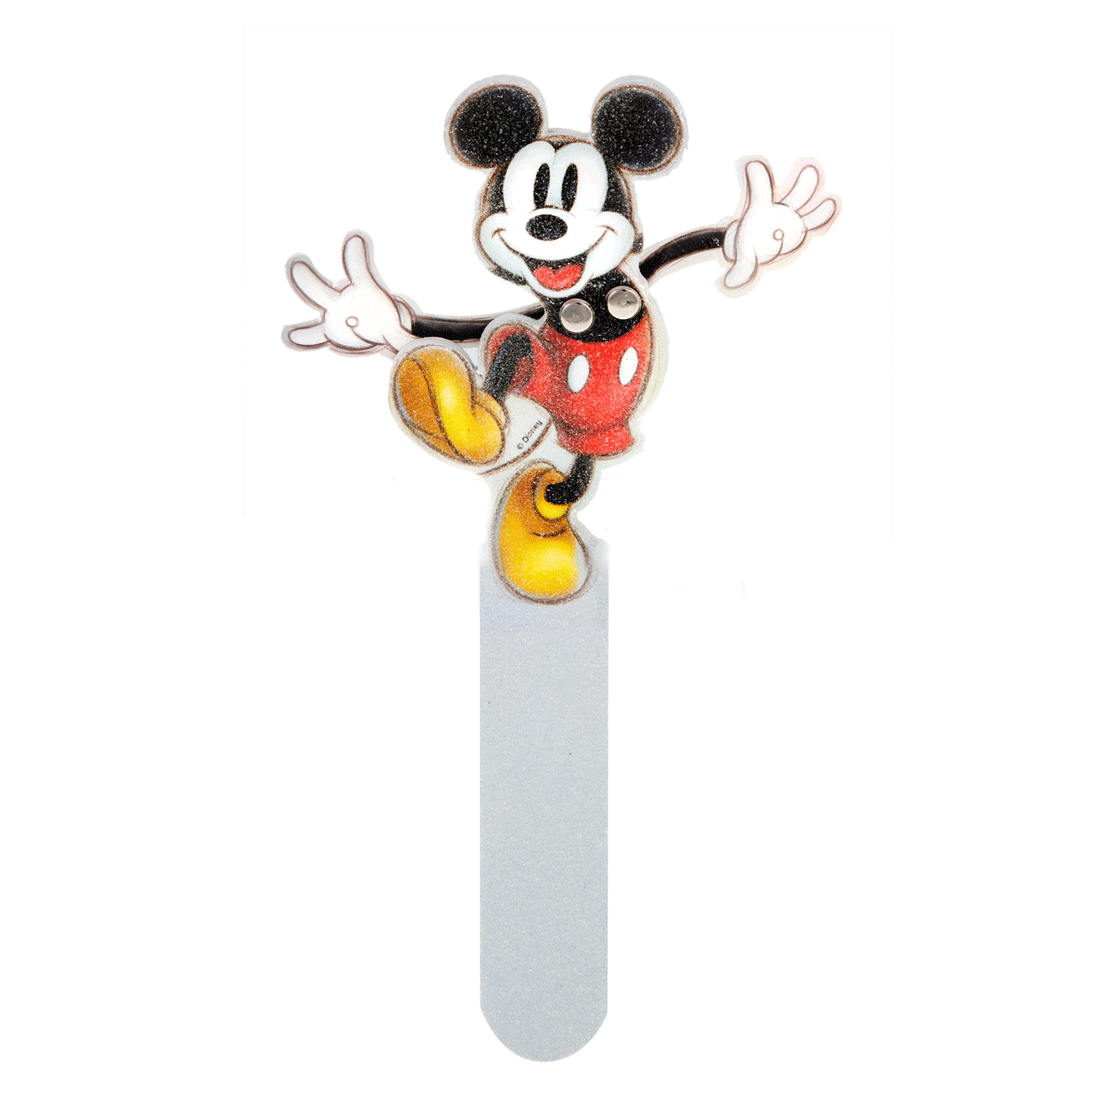 Shop Disney 100 Hand Care Set - Premium Nail Files from Mad Beauty Online now at Spoiled Brat 